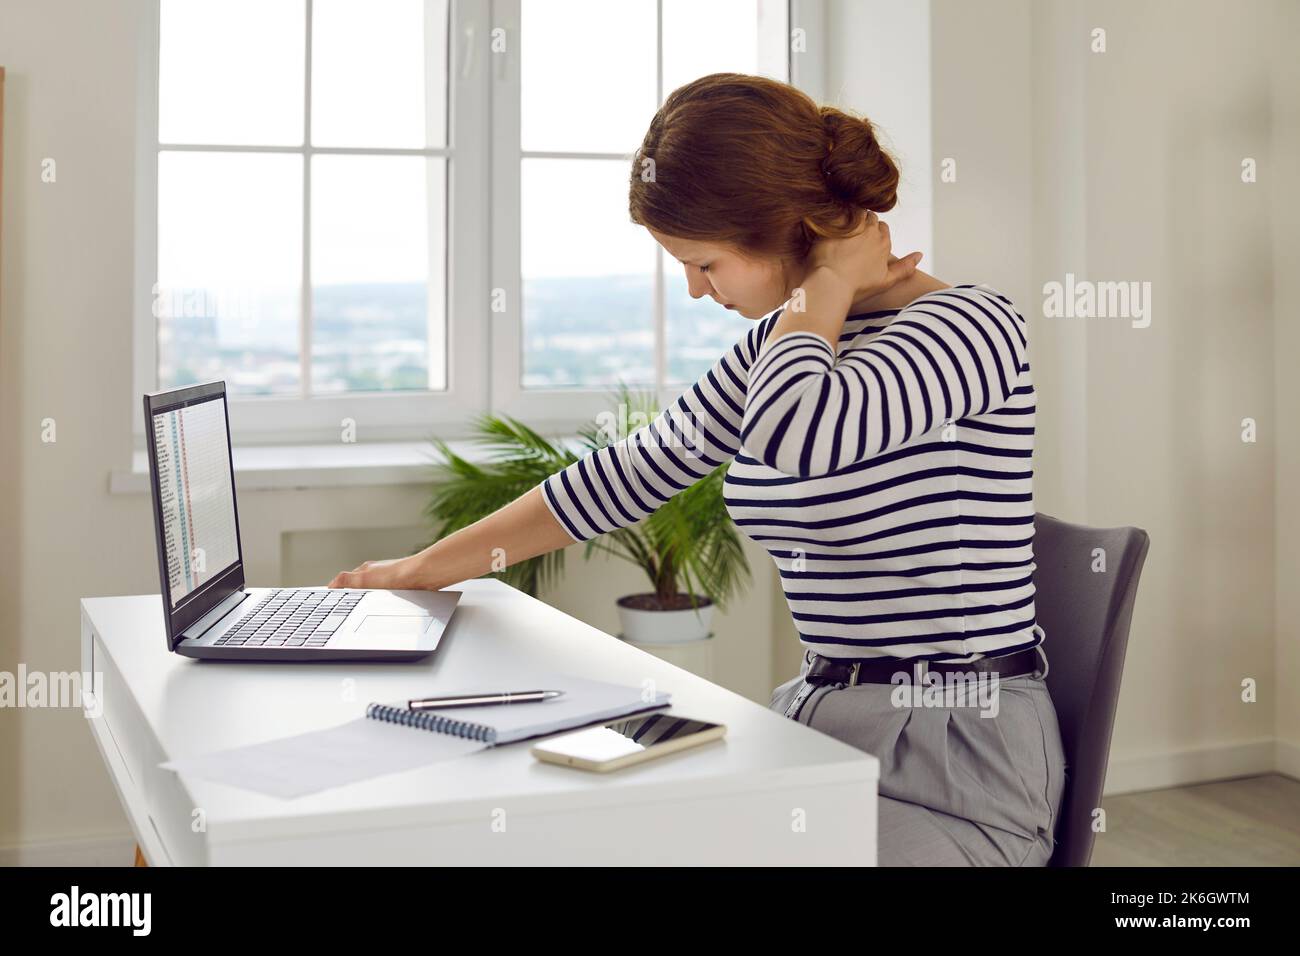 Tired, stressed woman with pain in her neck working on laptop computer at office desk Stock Photo